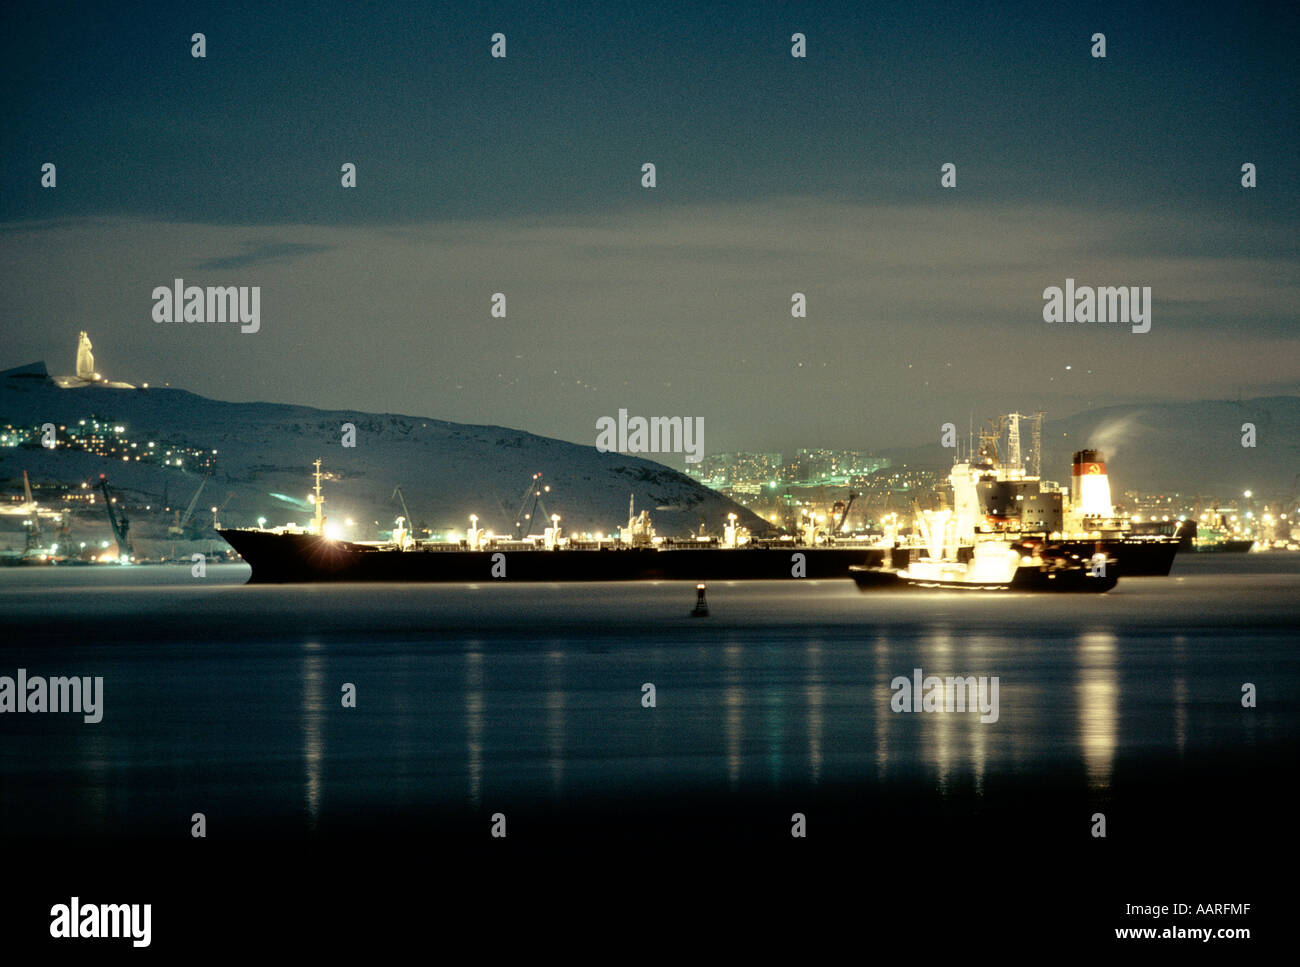 MURMANSK A HUGE CONTAINER SHIP IN MURMANSK HARBOUR AT NIGHT RUSSIA 1990 1990 Stock Photo